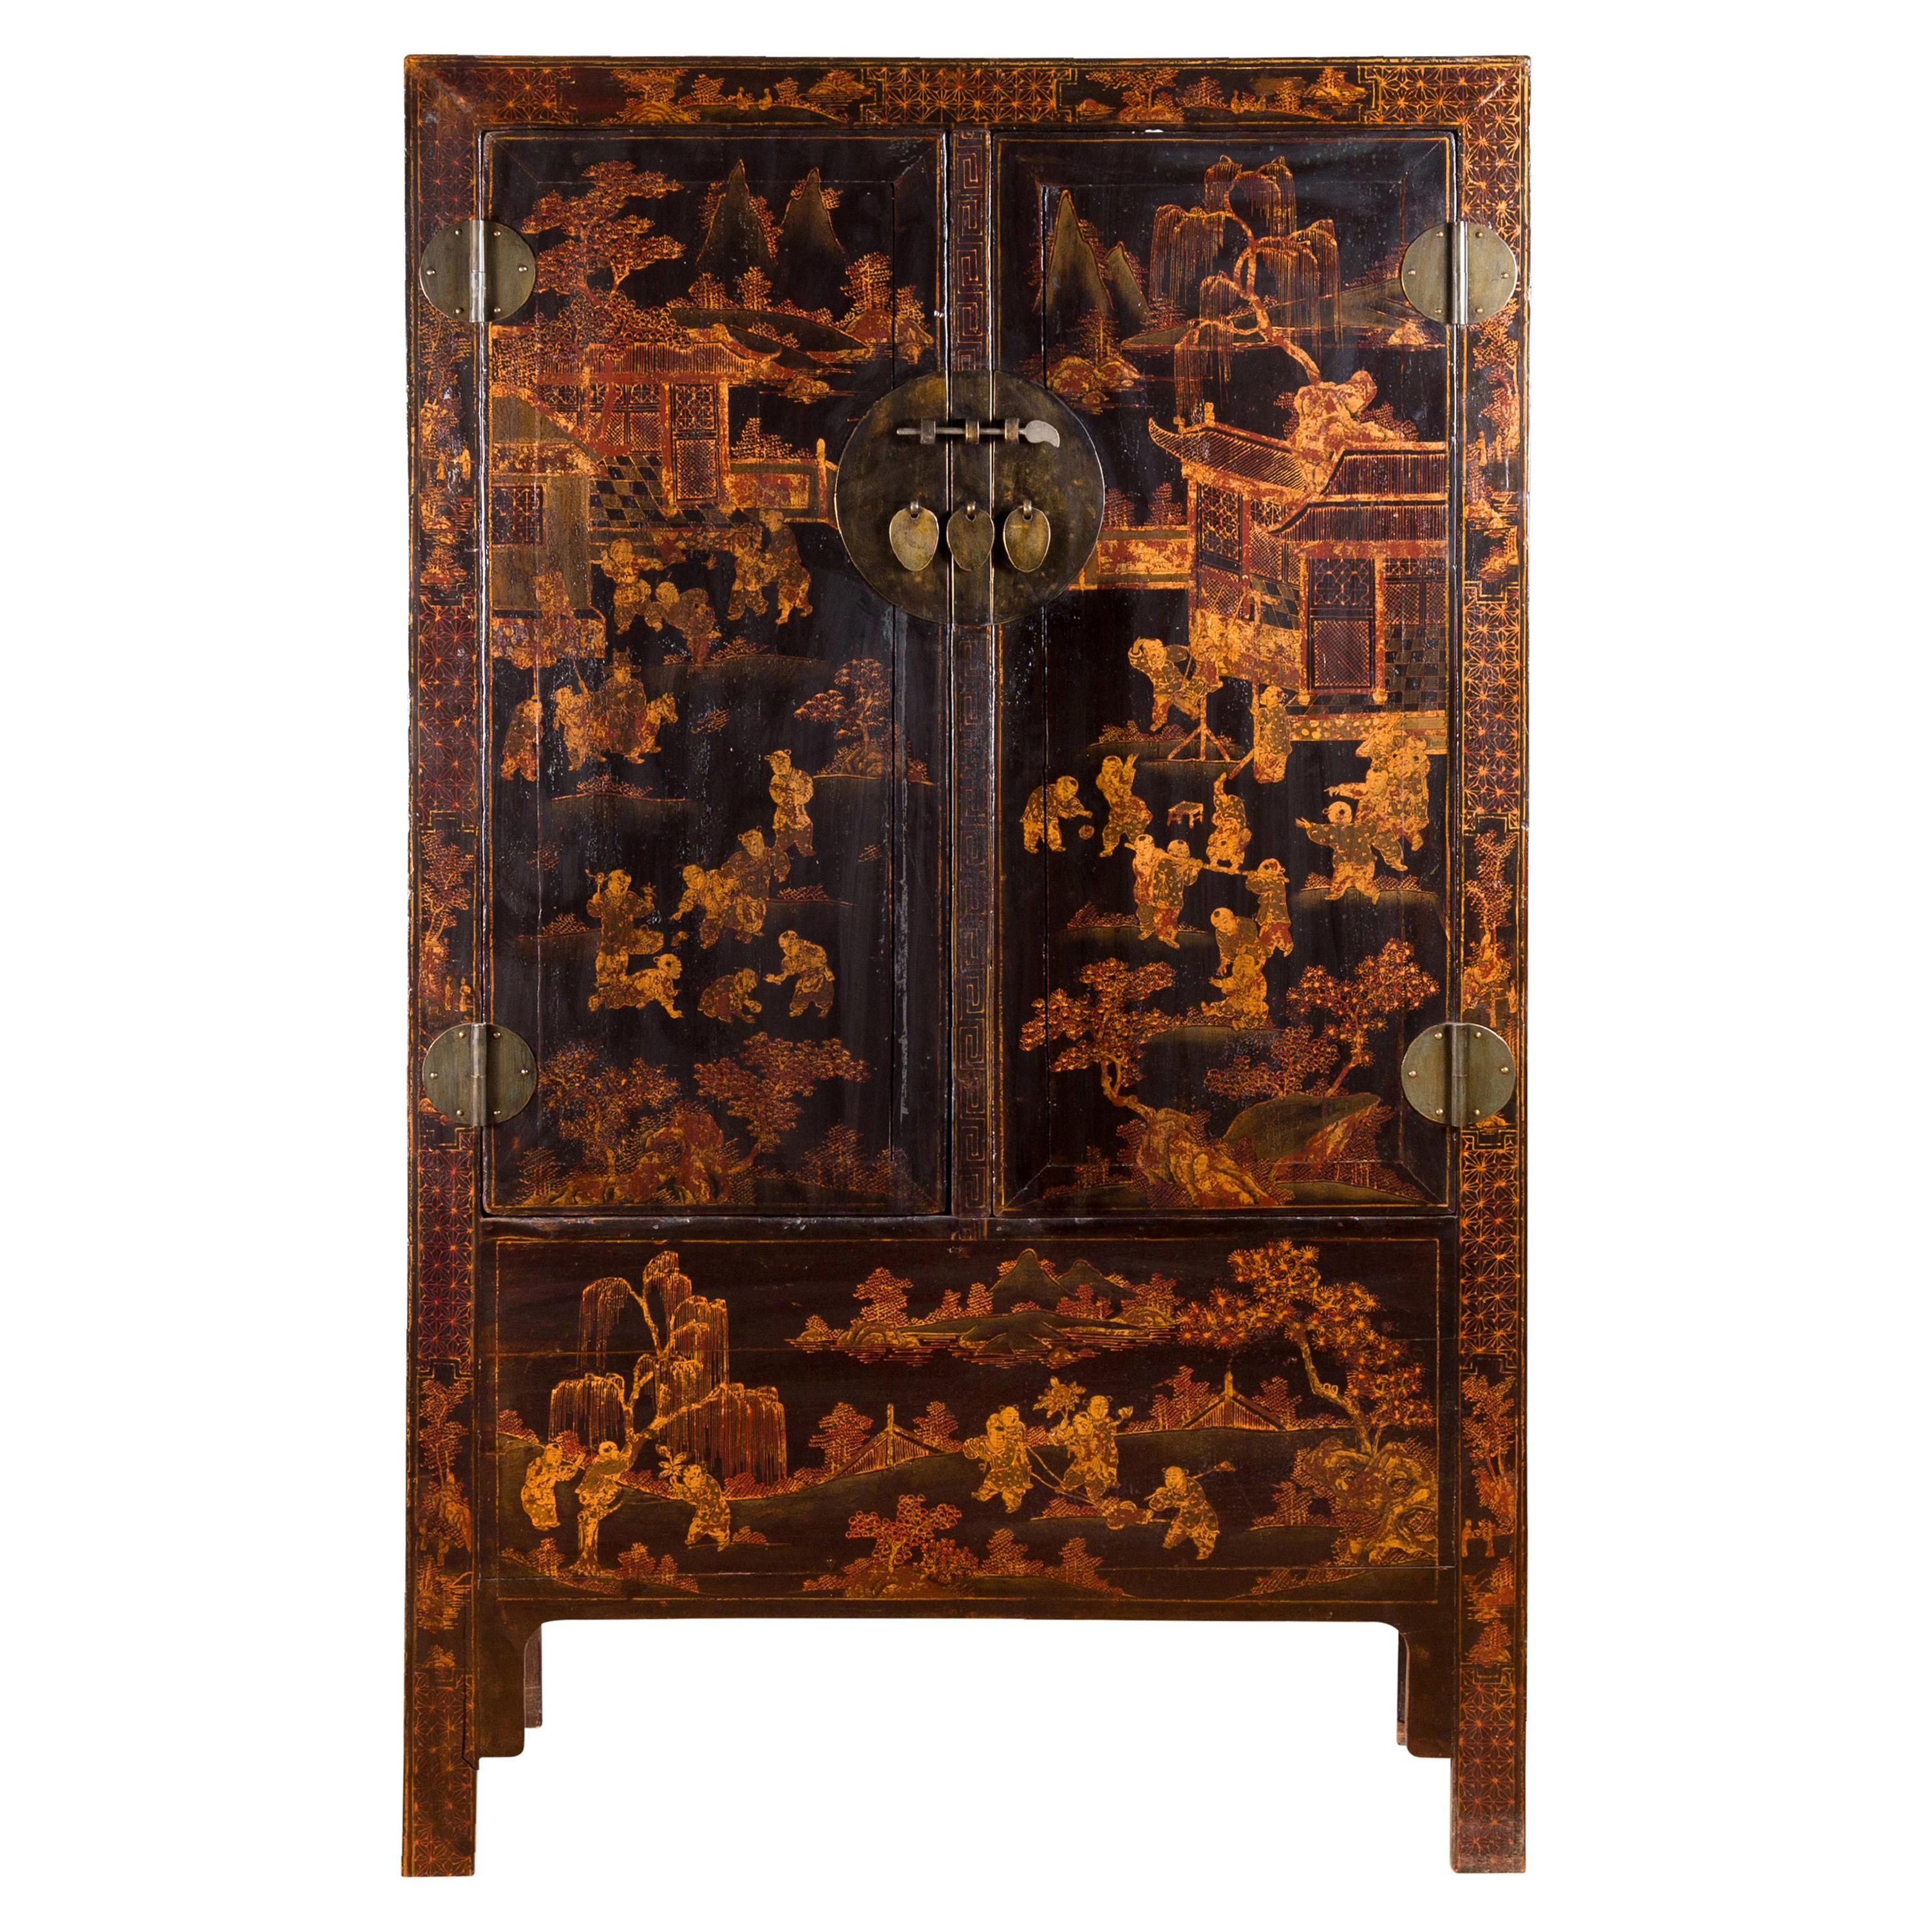 Qing Dynasty 19th Century Black Lacquer Cabinet with Gilt Chinoiserie Decor